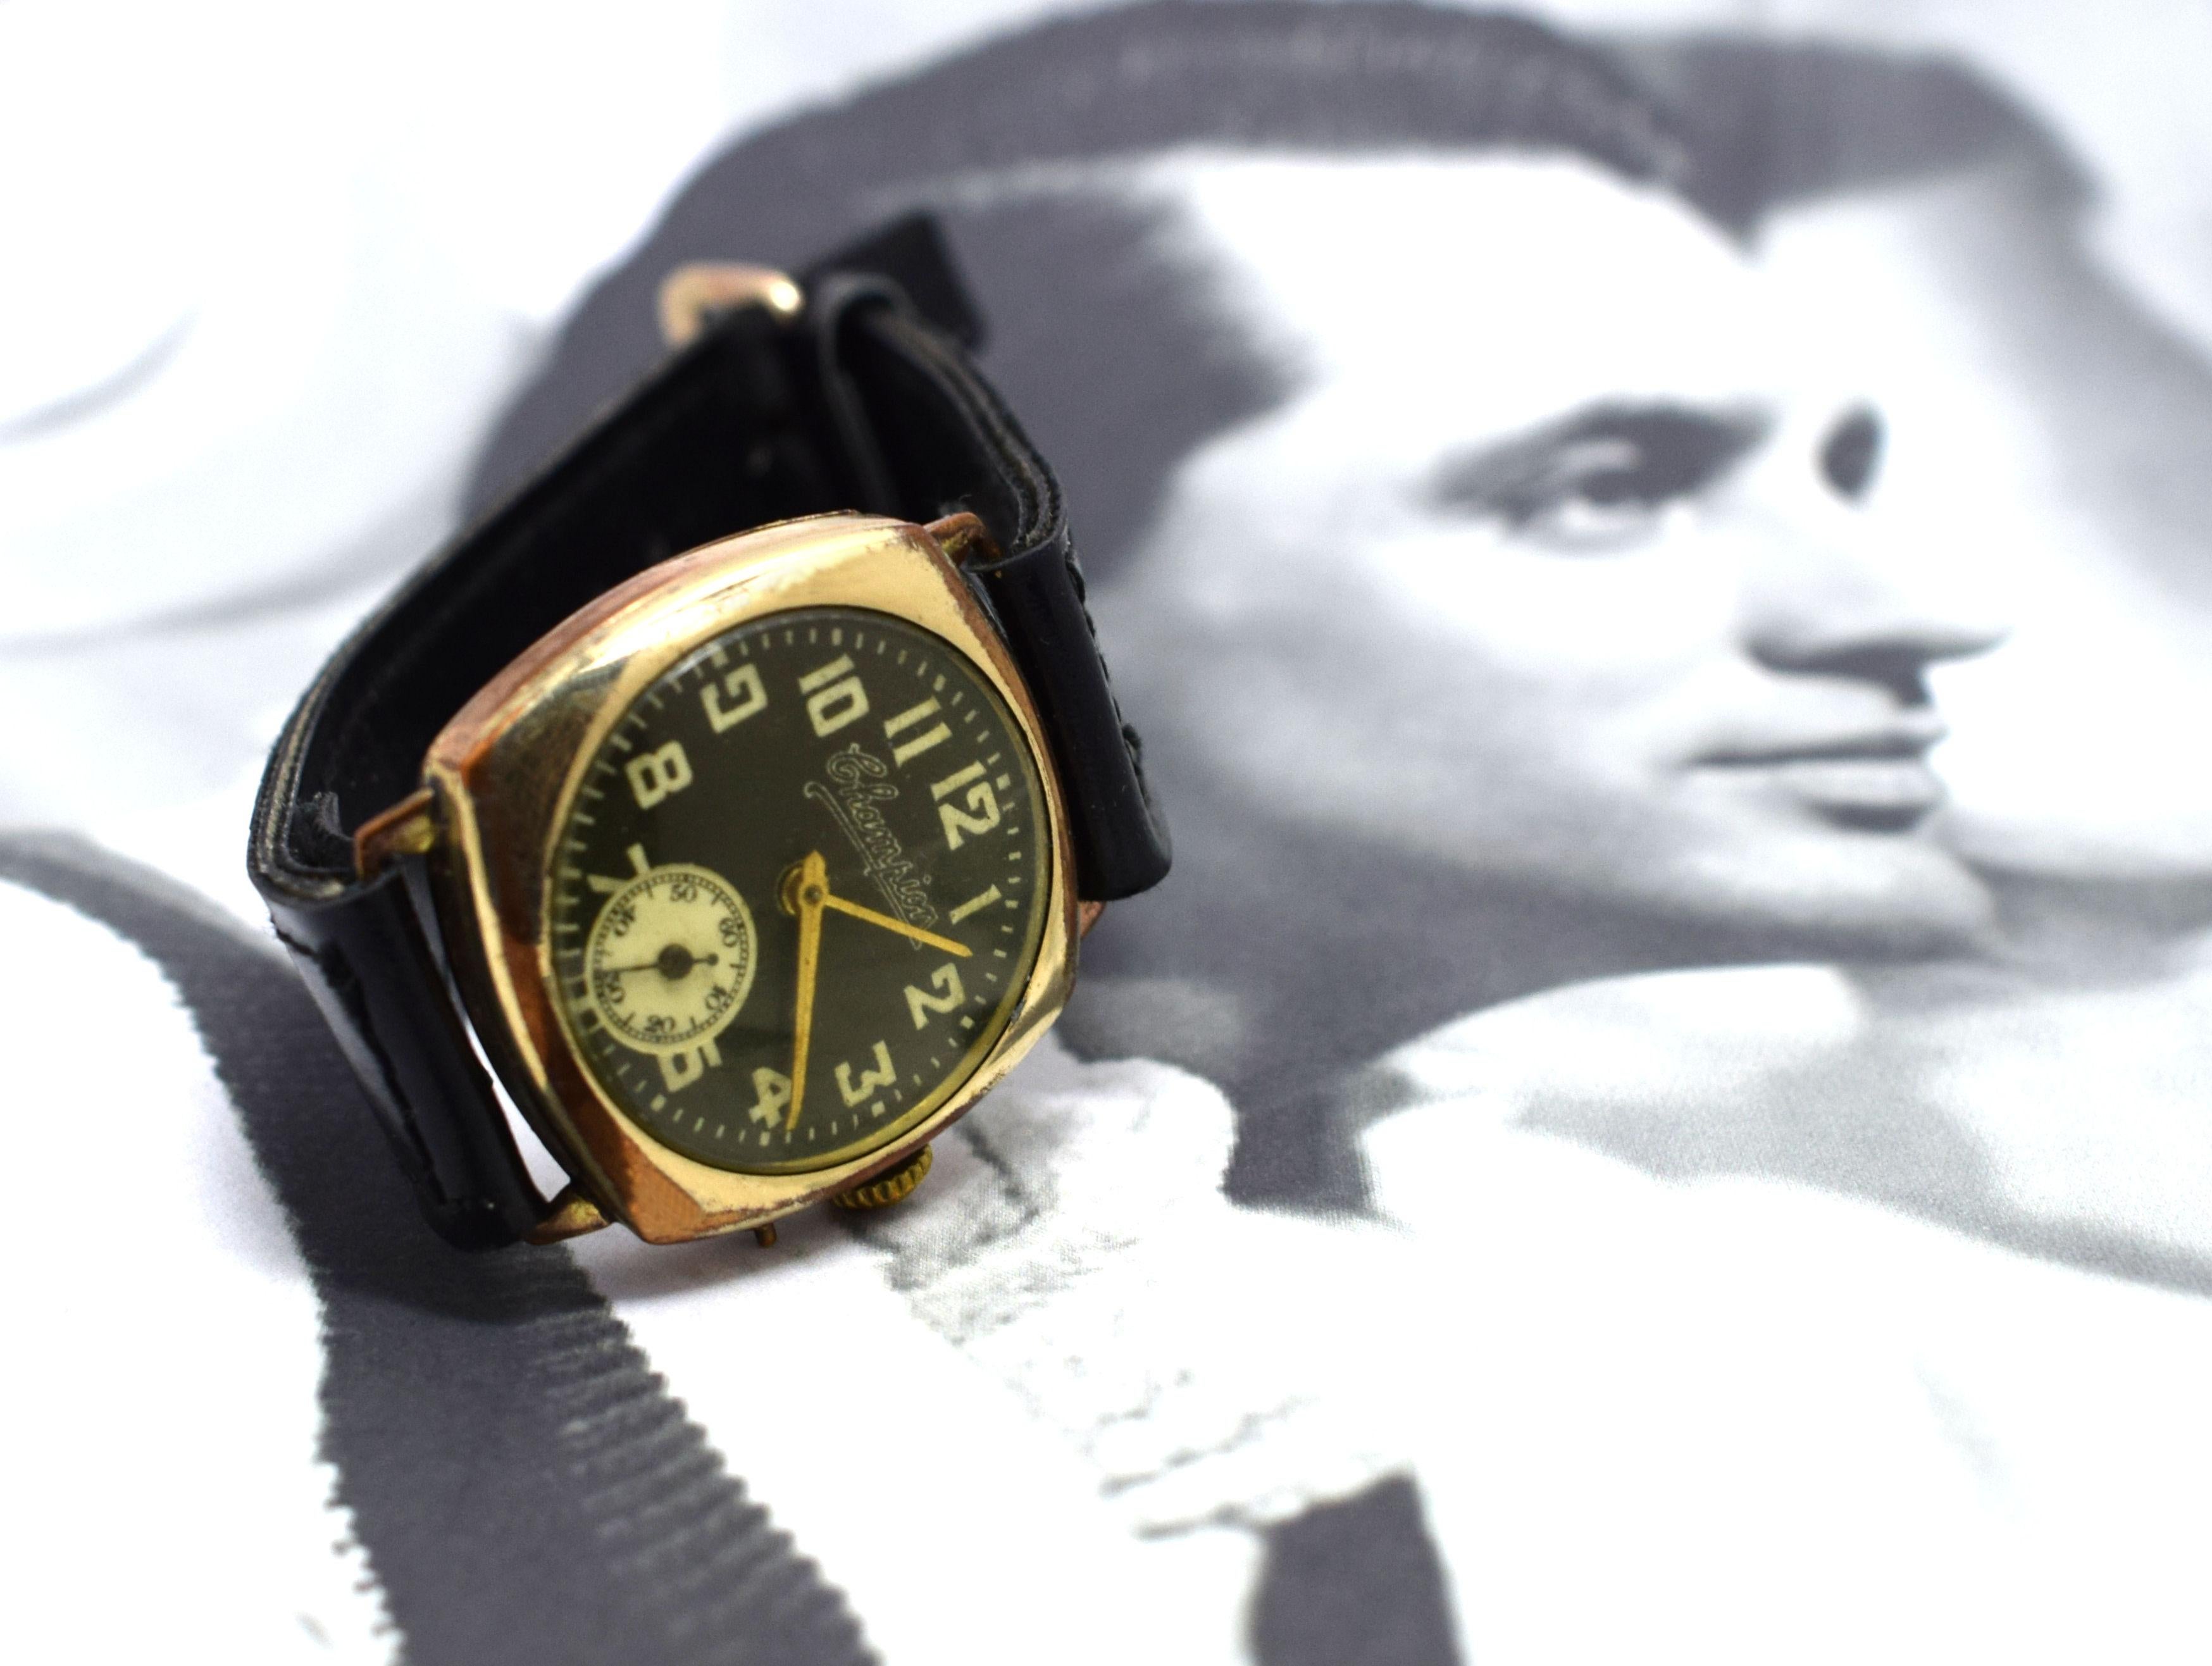 For your consideration is this very attractive and unusual men's Art Deco watch. Dating to the 1930s, a very nice cushion watch with great script and lovely black dial working well on a newer real leather band. A great looking watch in great working